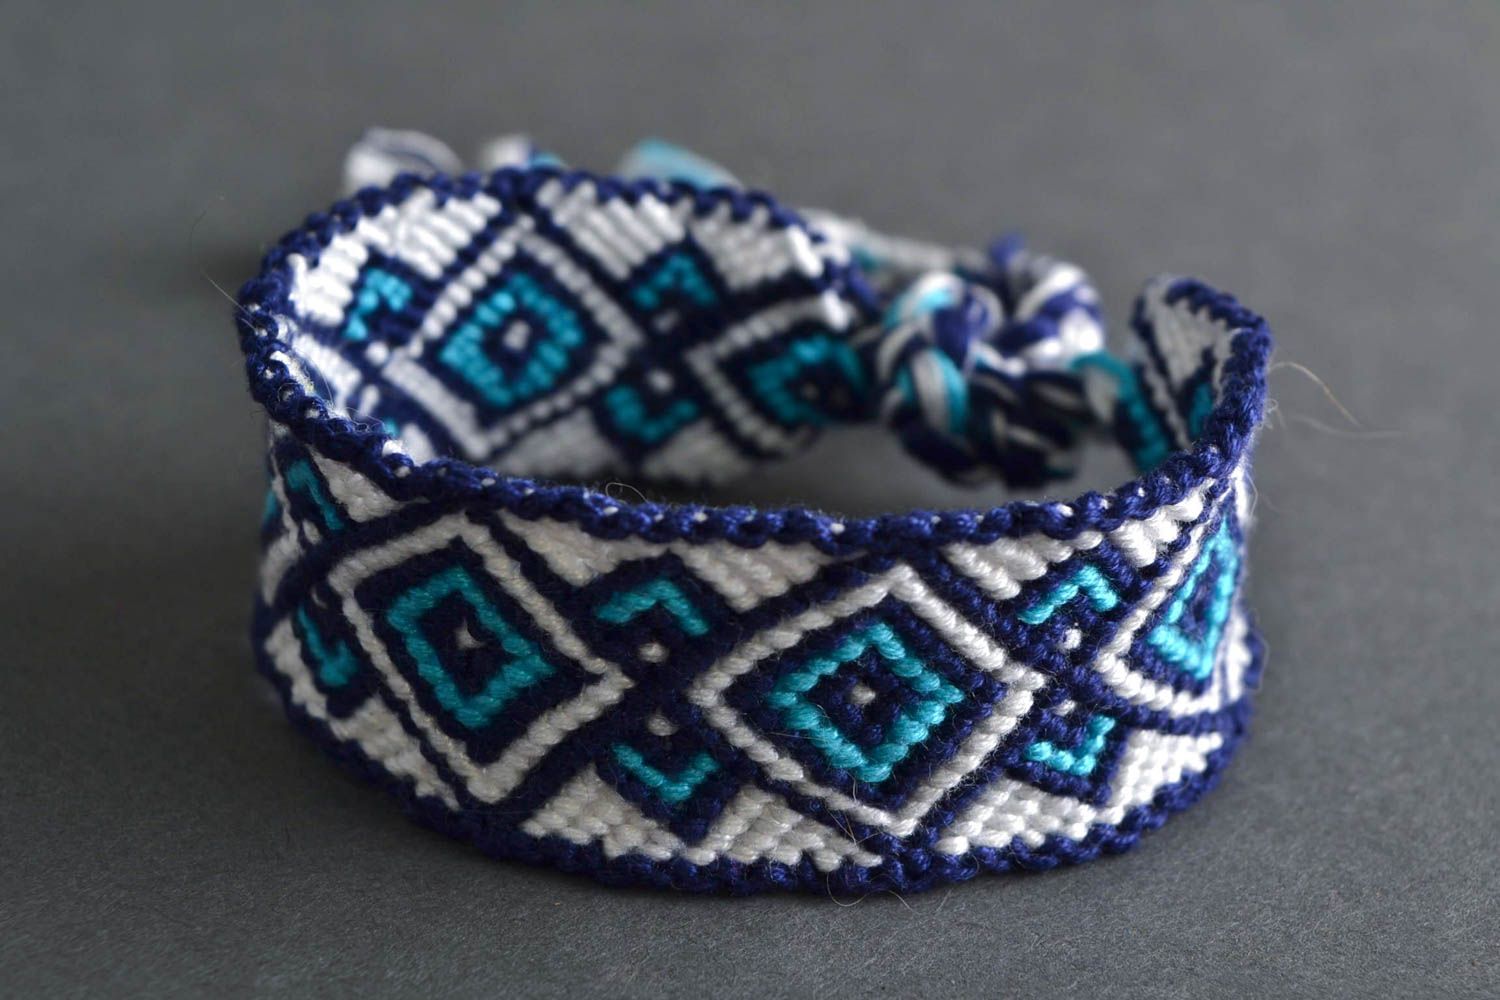 Handmade macrame bracelet woven of white and blue embroidery floss with ornament photo 1